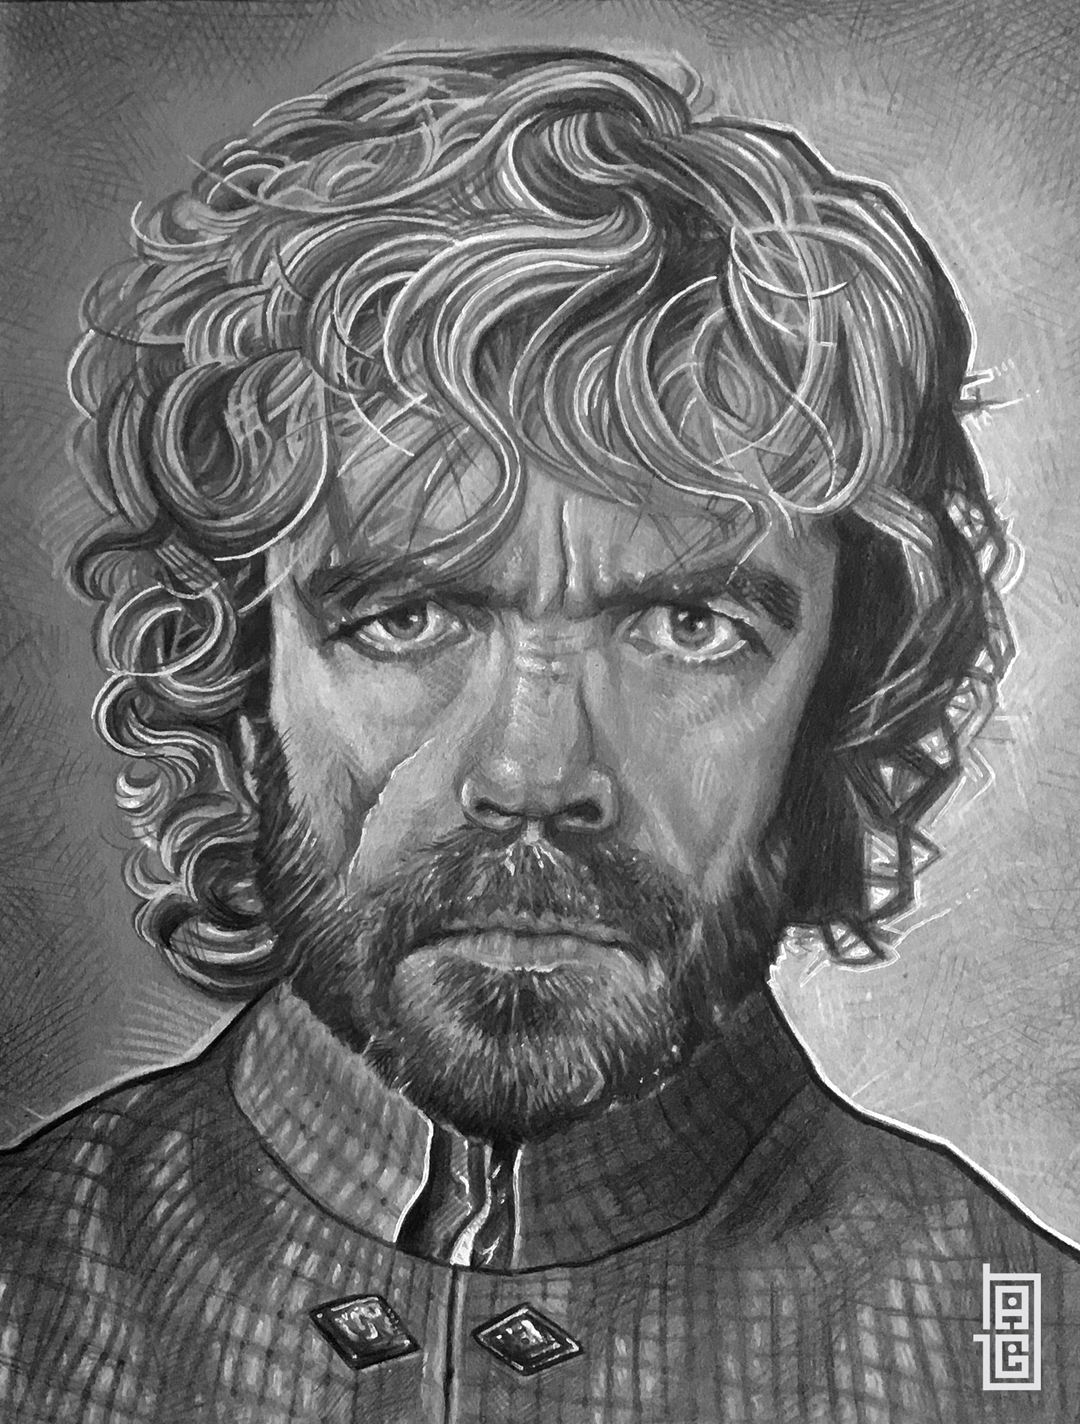 TYRION LANNISTER